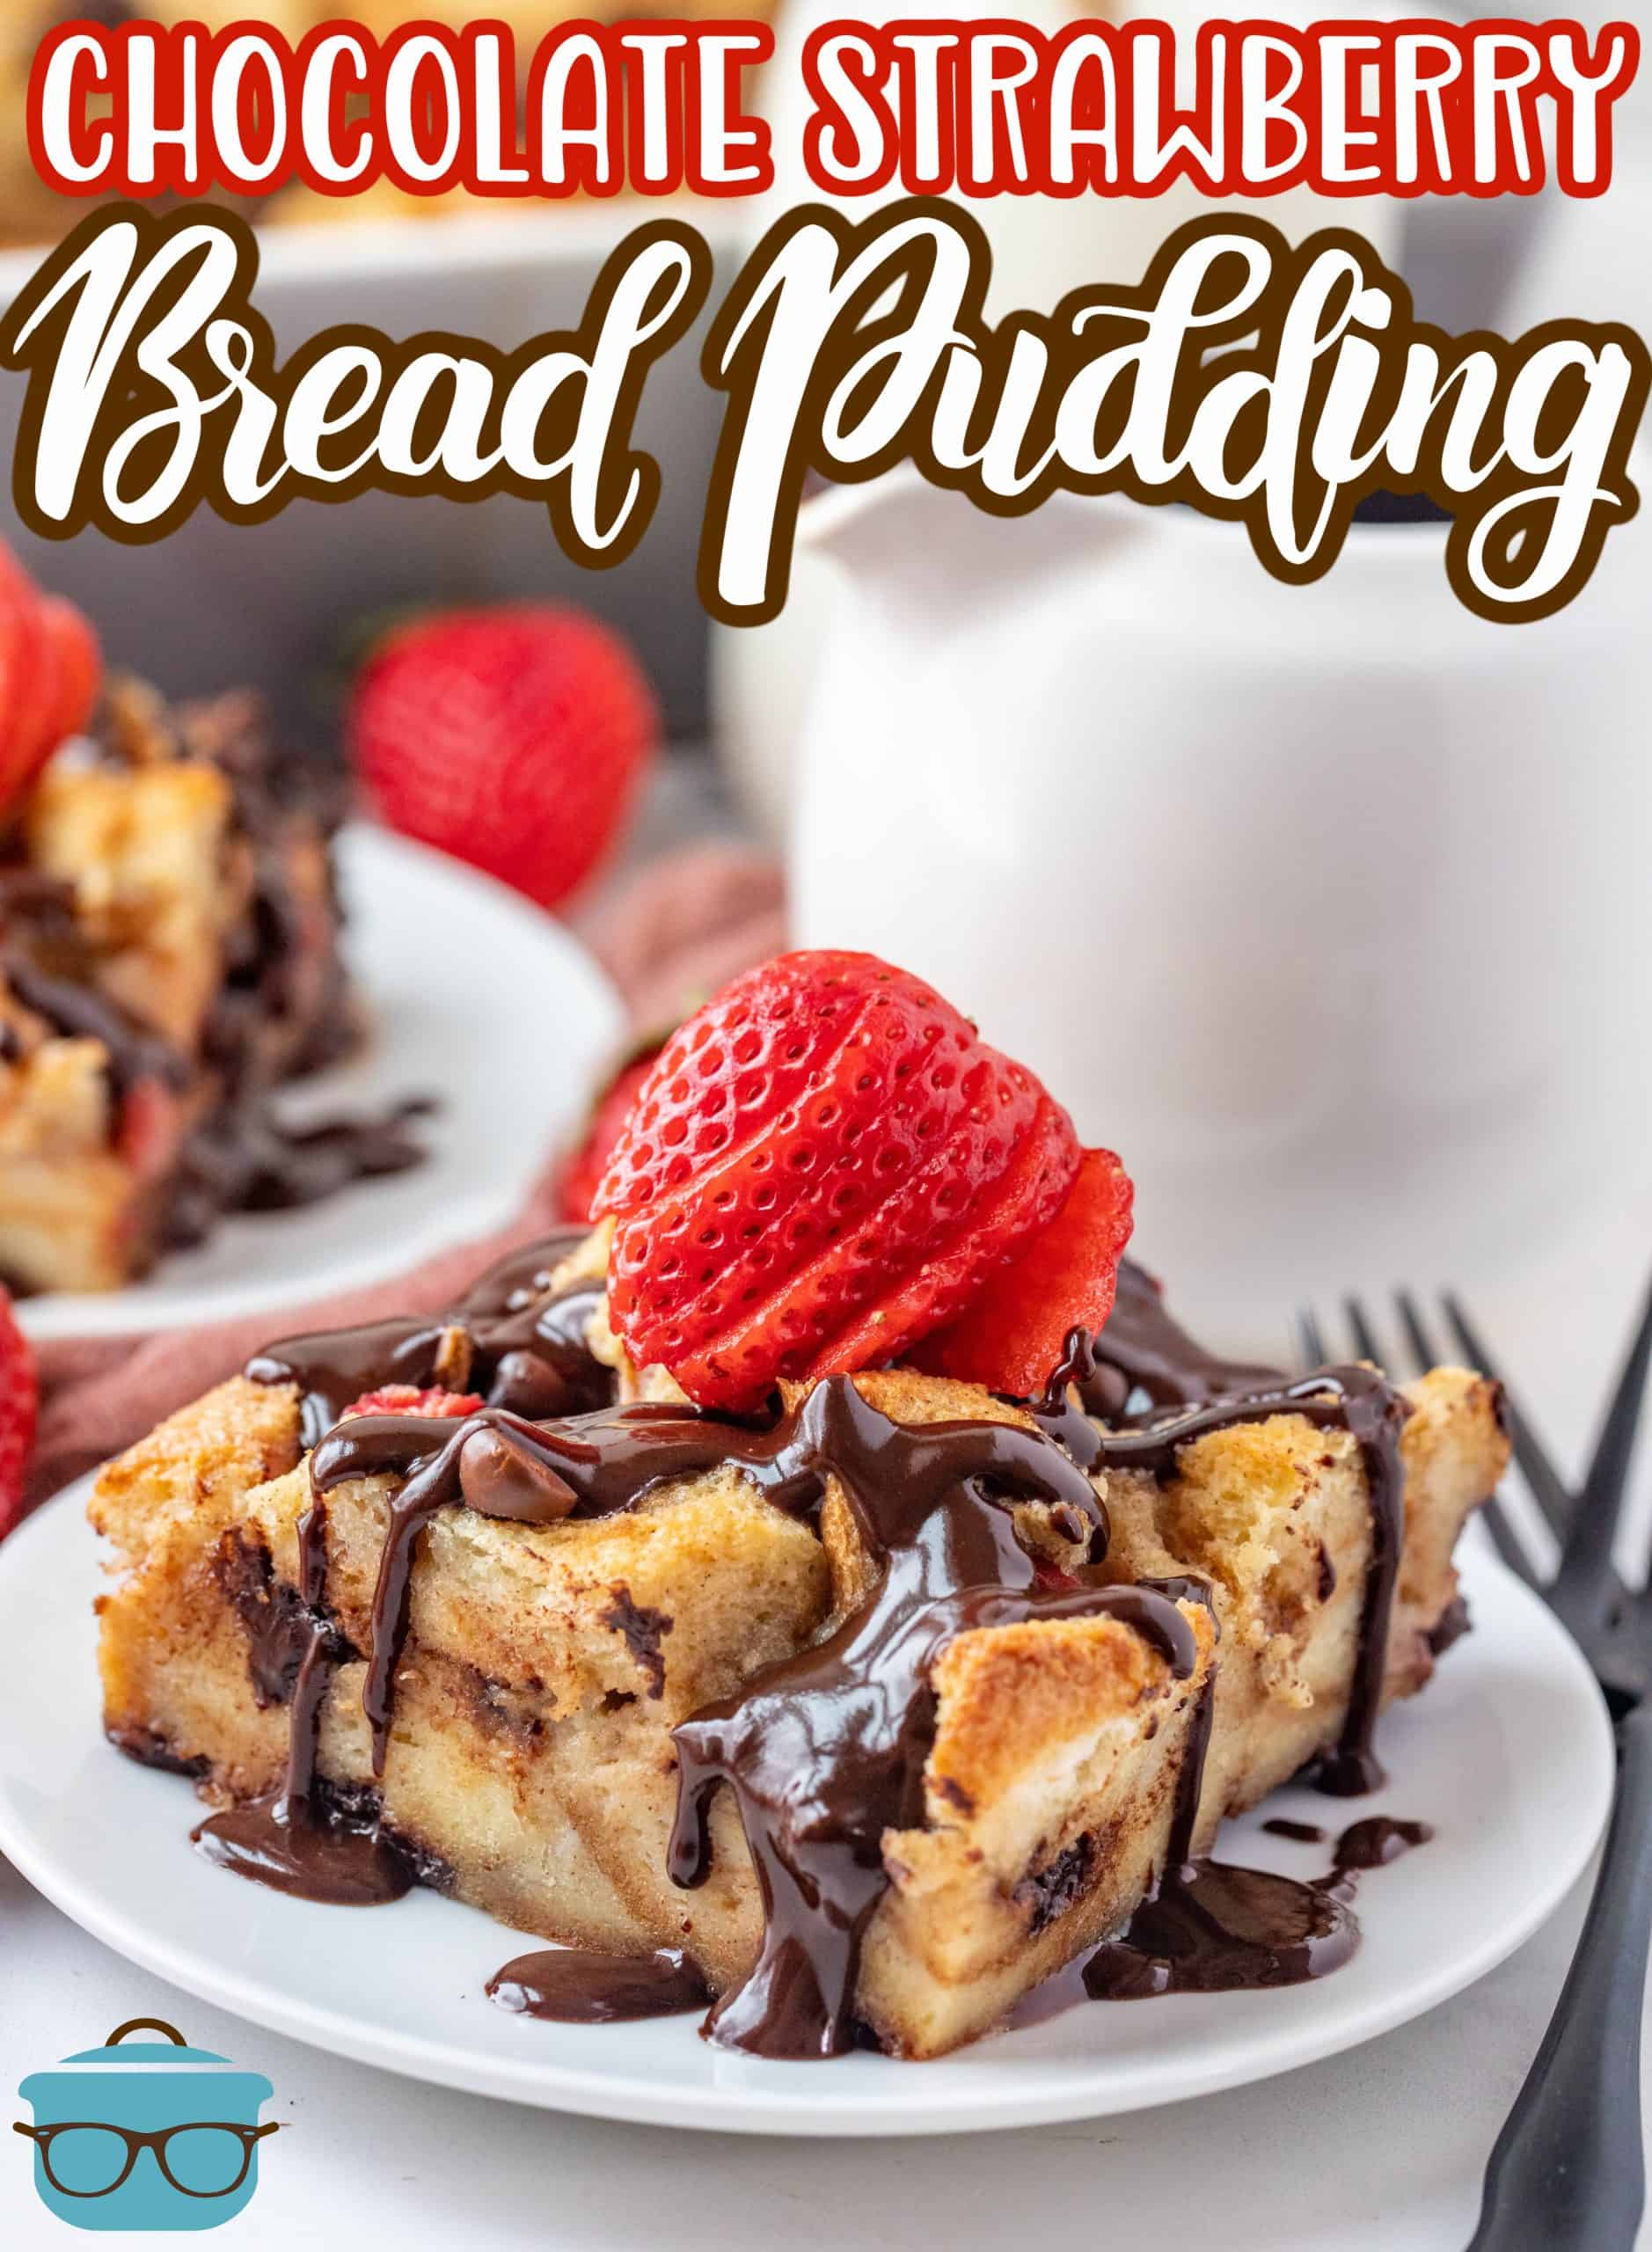 Chocolate Covered Strawberry Bread Pudding on white plate topped with chocolate sauce.